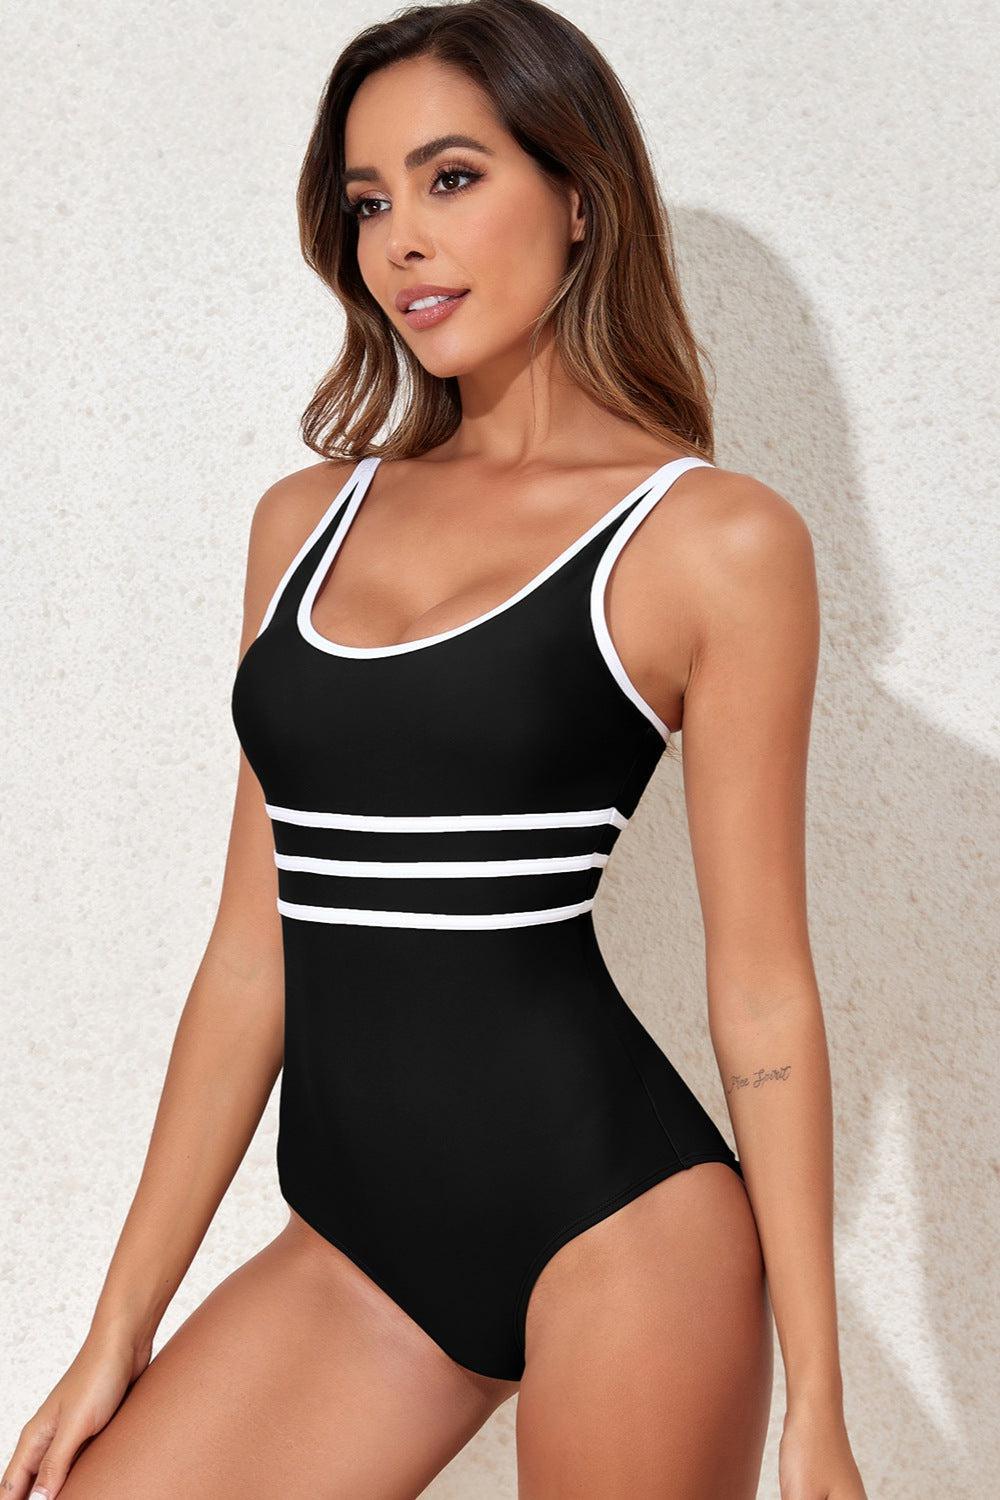 a woman in a black and white one piece swimsuit